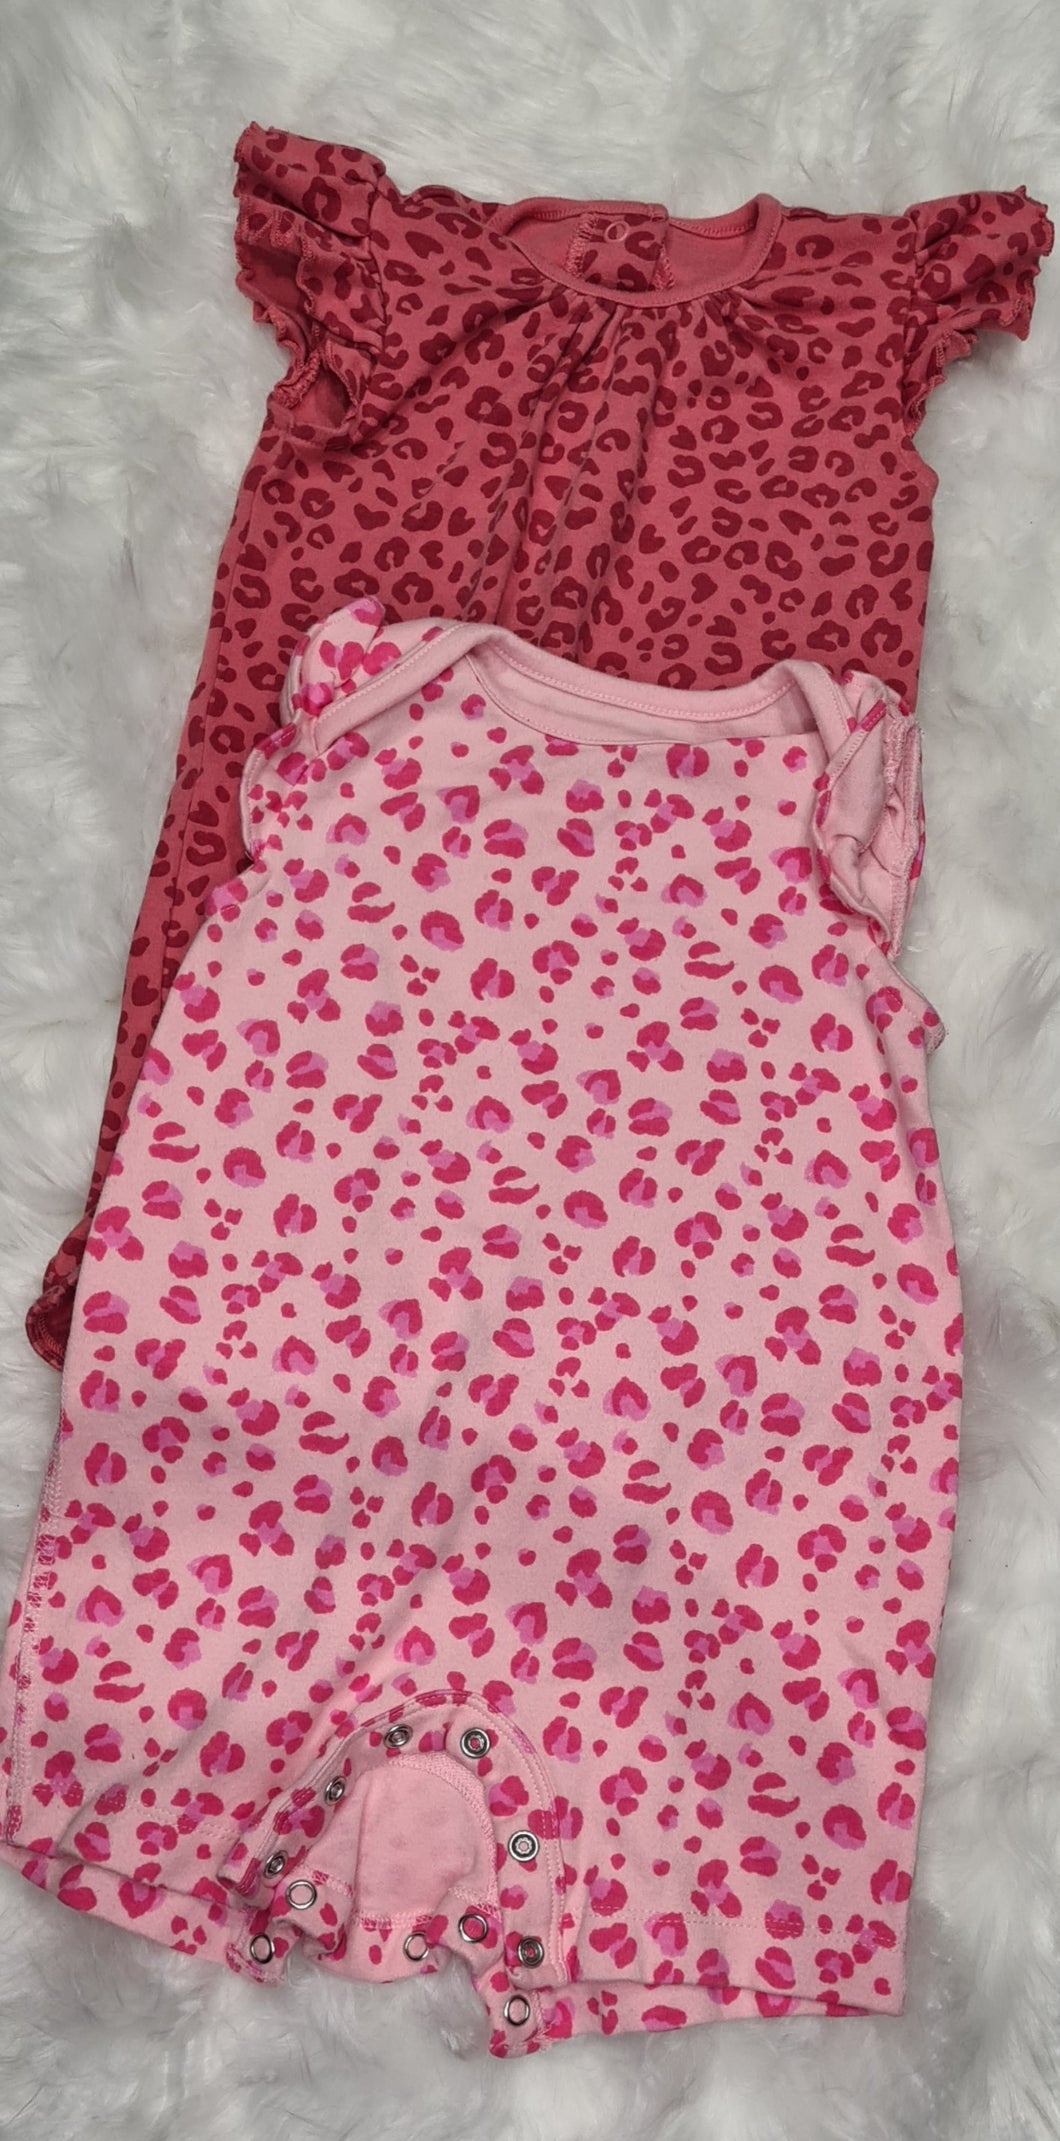 Girls 6-9 months - Set of 2 pink Rompers